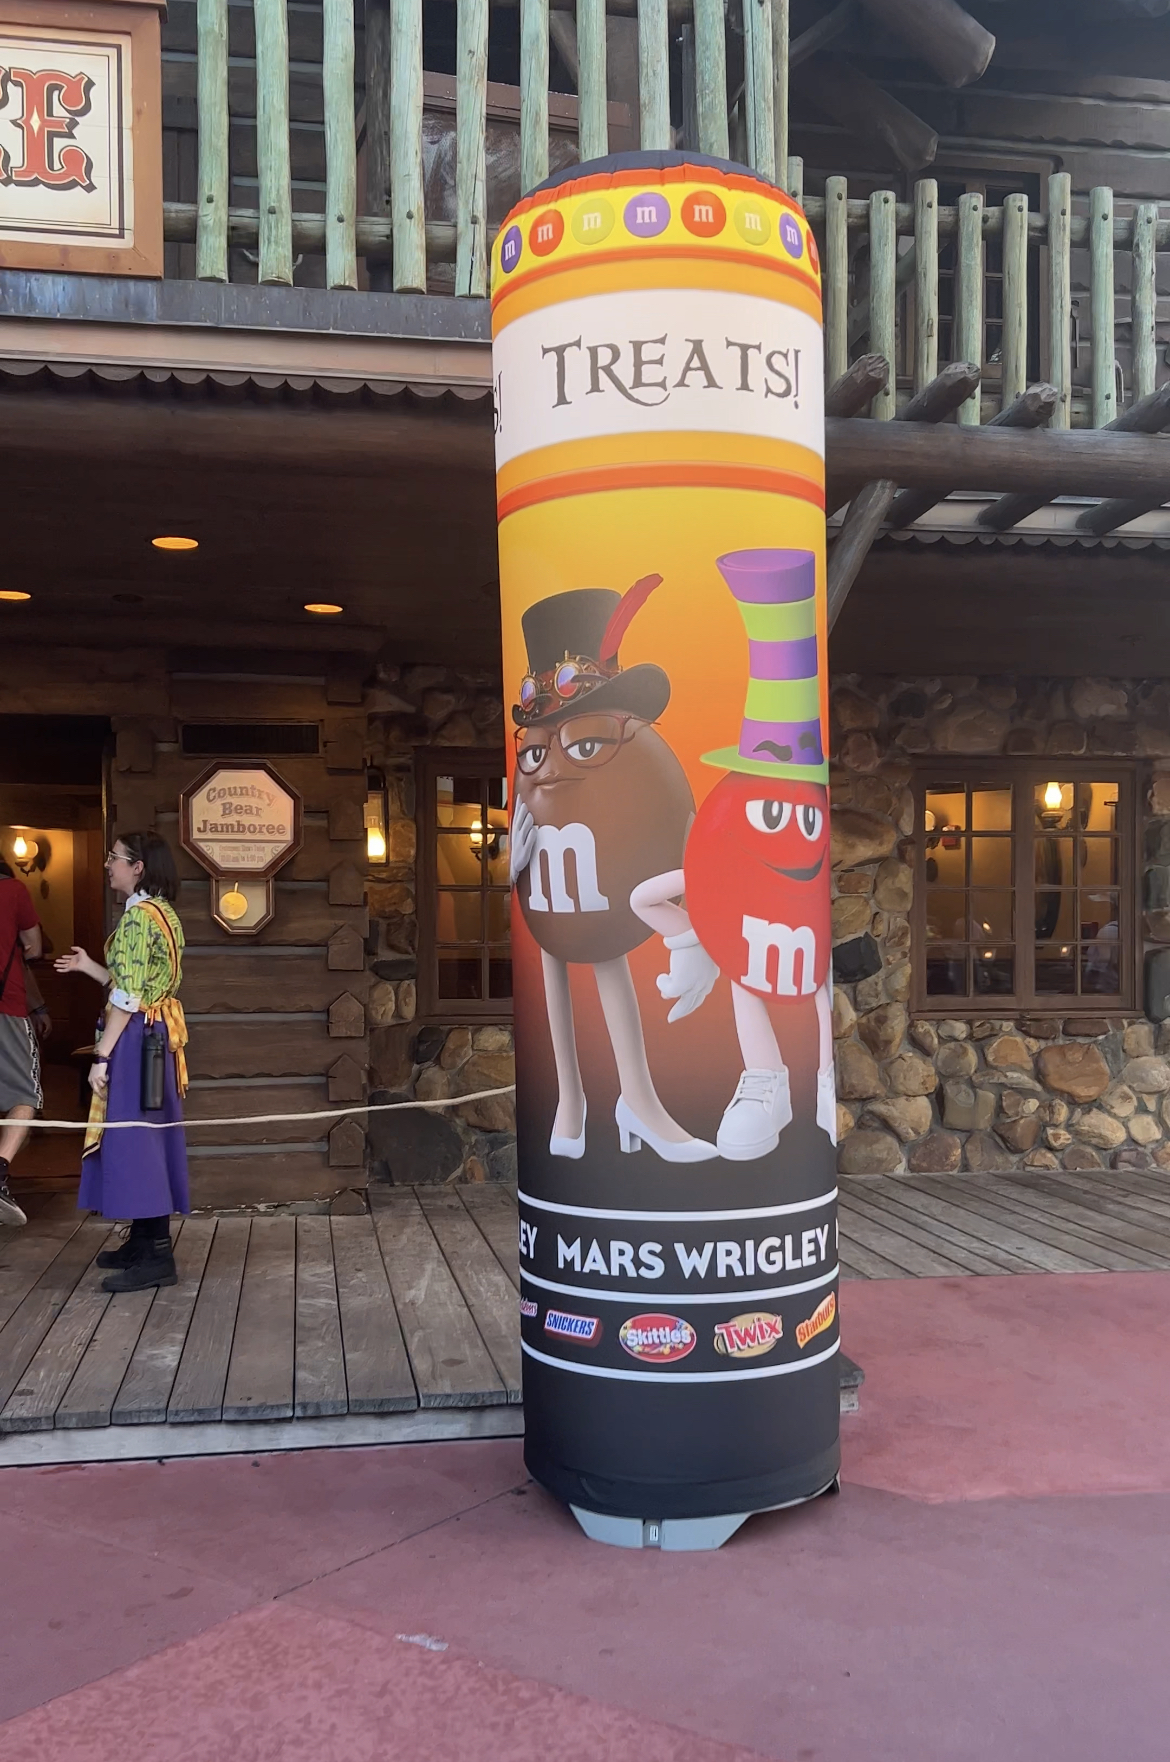 treat station at Mickey's Not So Scary Halloween party